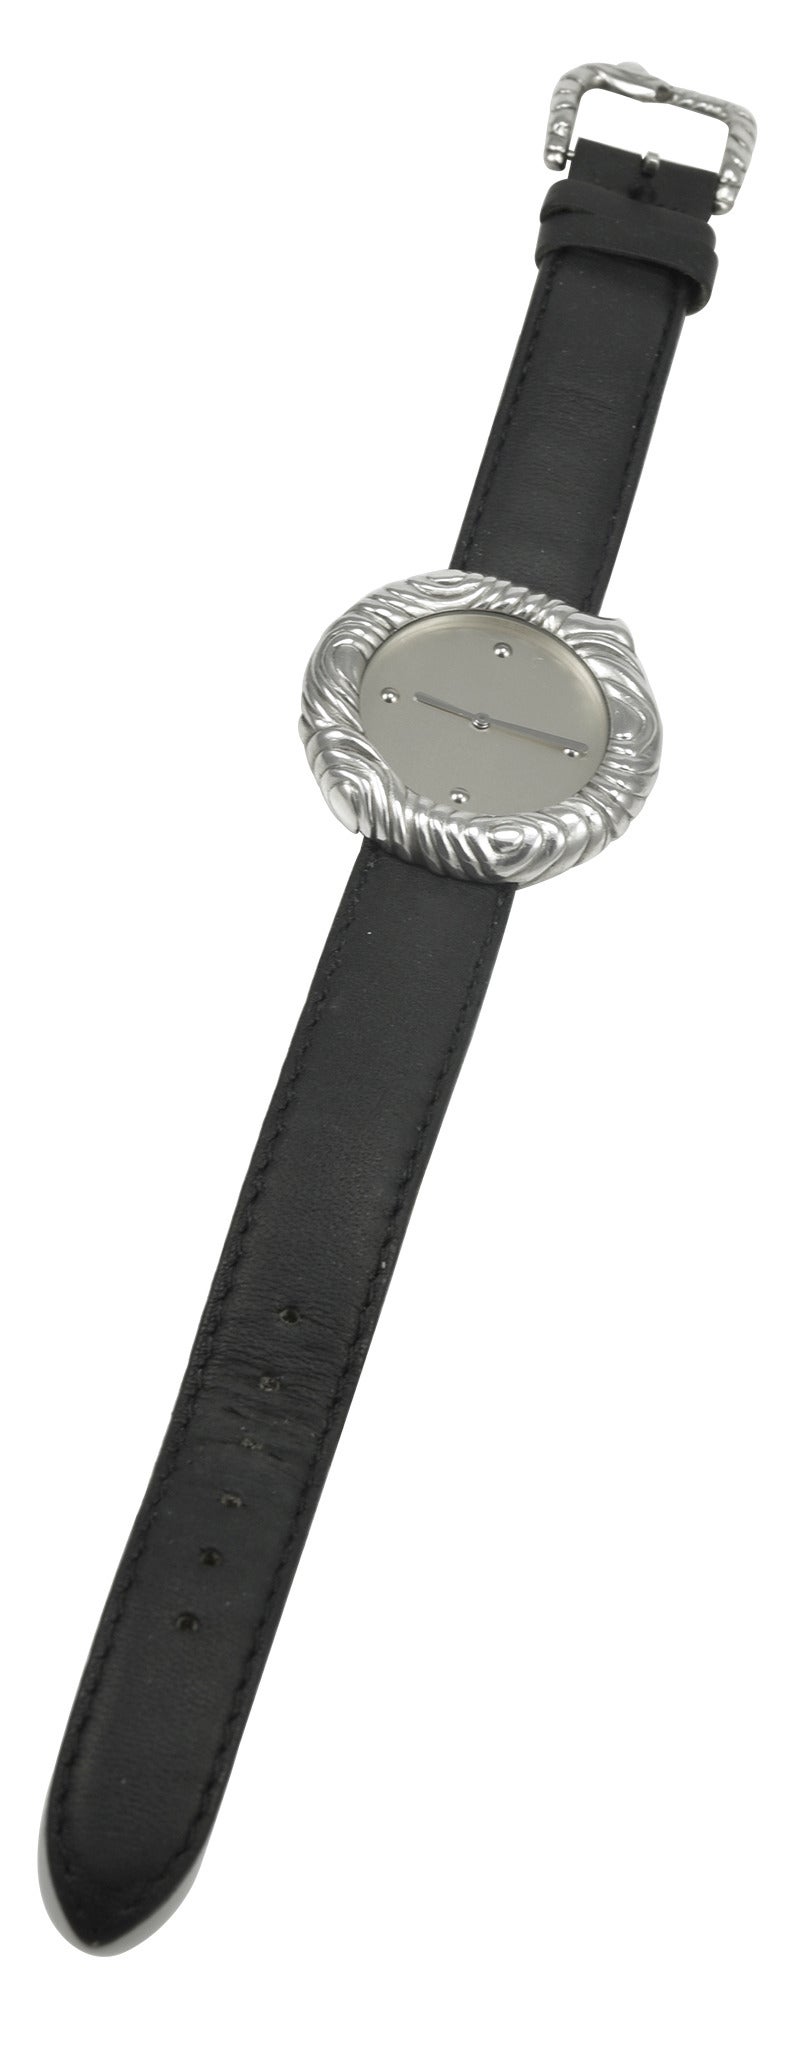 Sterling silver watch with heavily embossed border and buckle. Made and signed by Angela Cummings.1 1/3